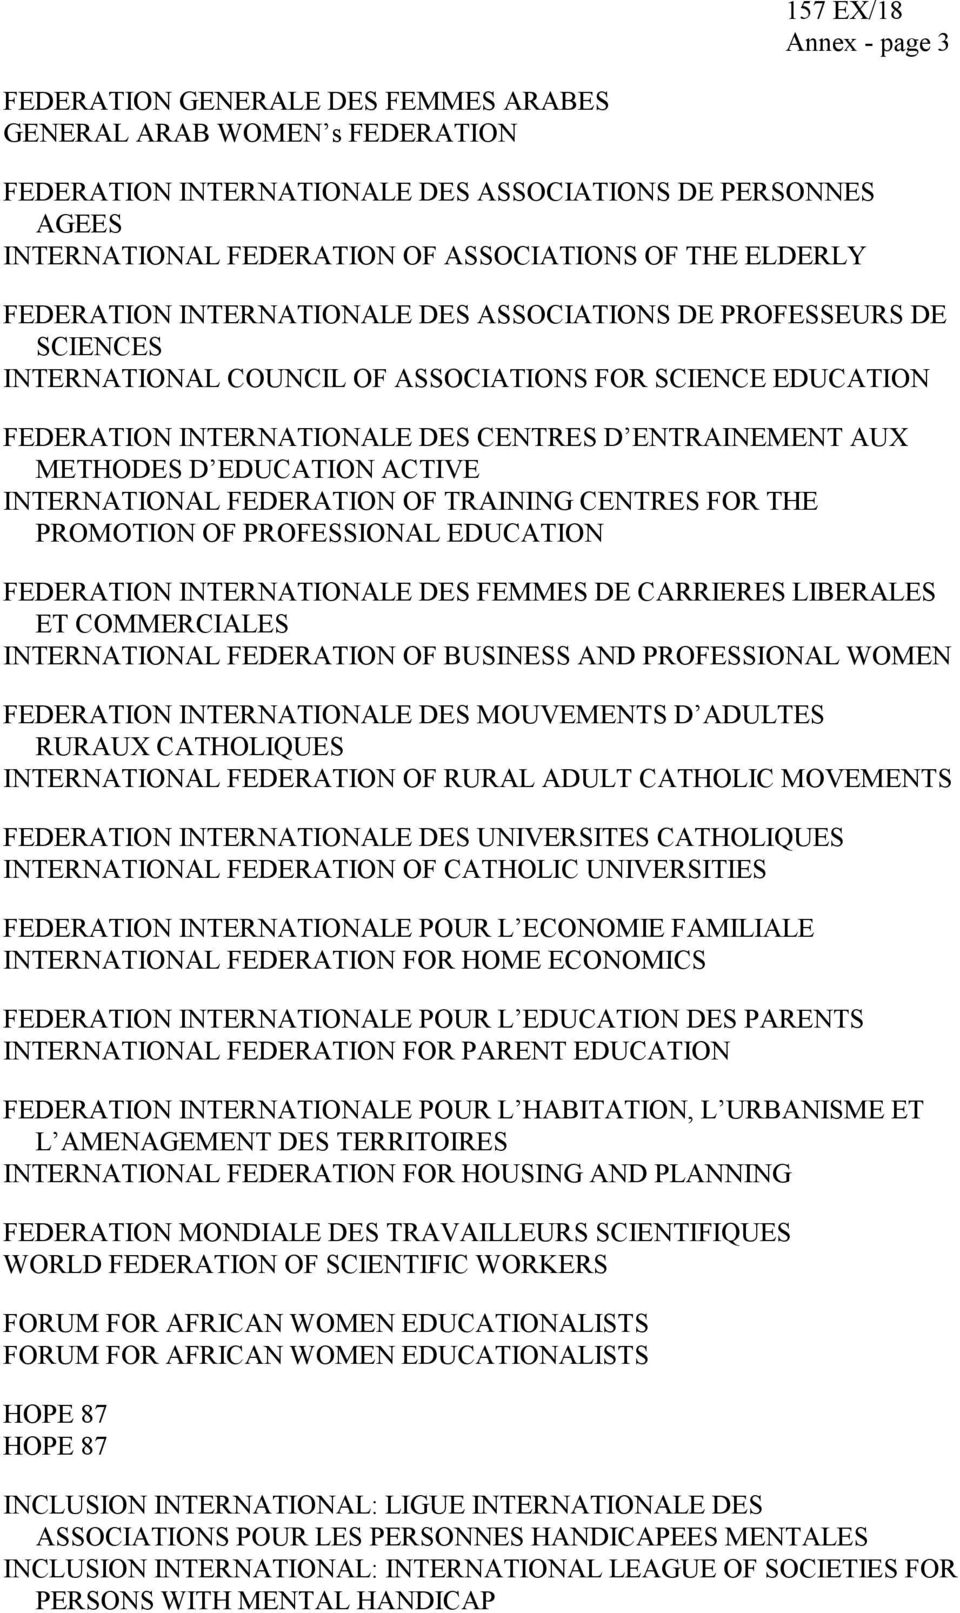 METHODES D EDUCATION ACTIVE INTERNATIONAL FEDERATION OF TRAINING CENTRES FOR THE PROMOTION OF PROFESSIONAL EDUCATION FEDERATION INTERNATIONALE DES FEMMES DE CARRIERES LIBERALES ET COMMERCIALES